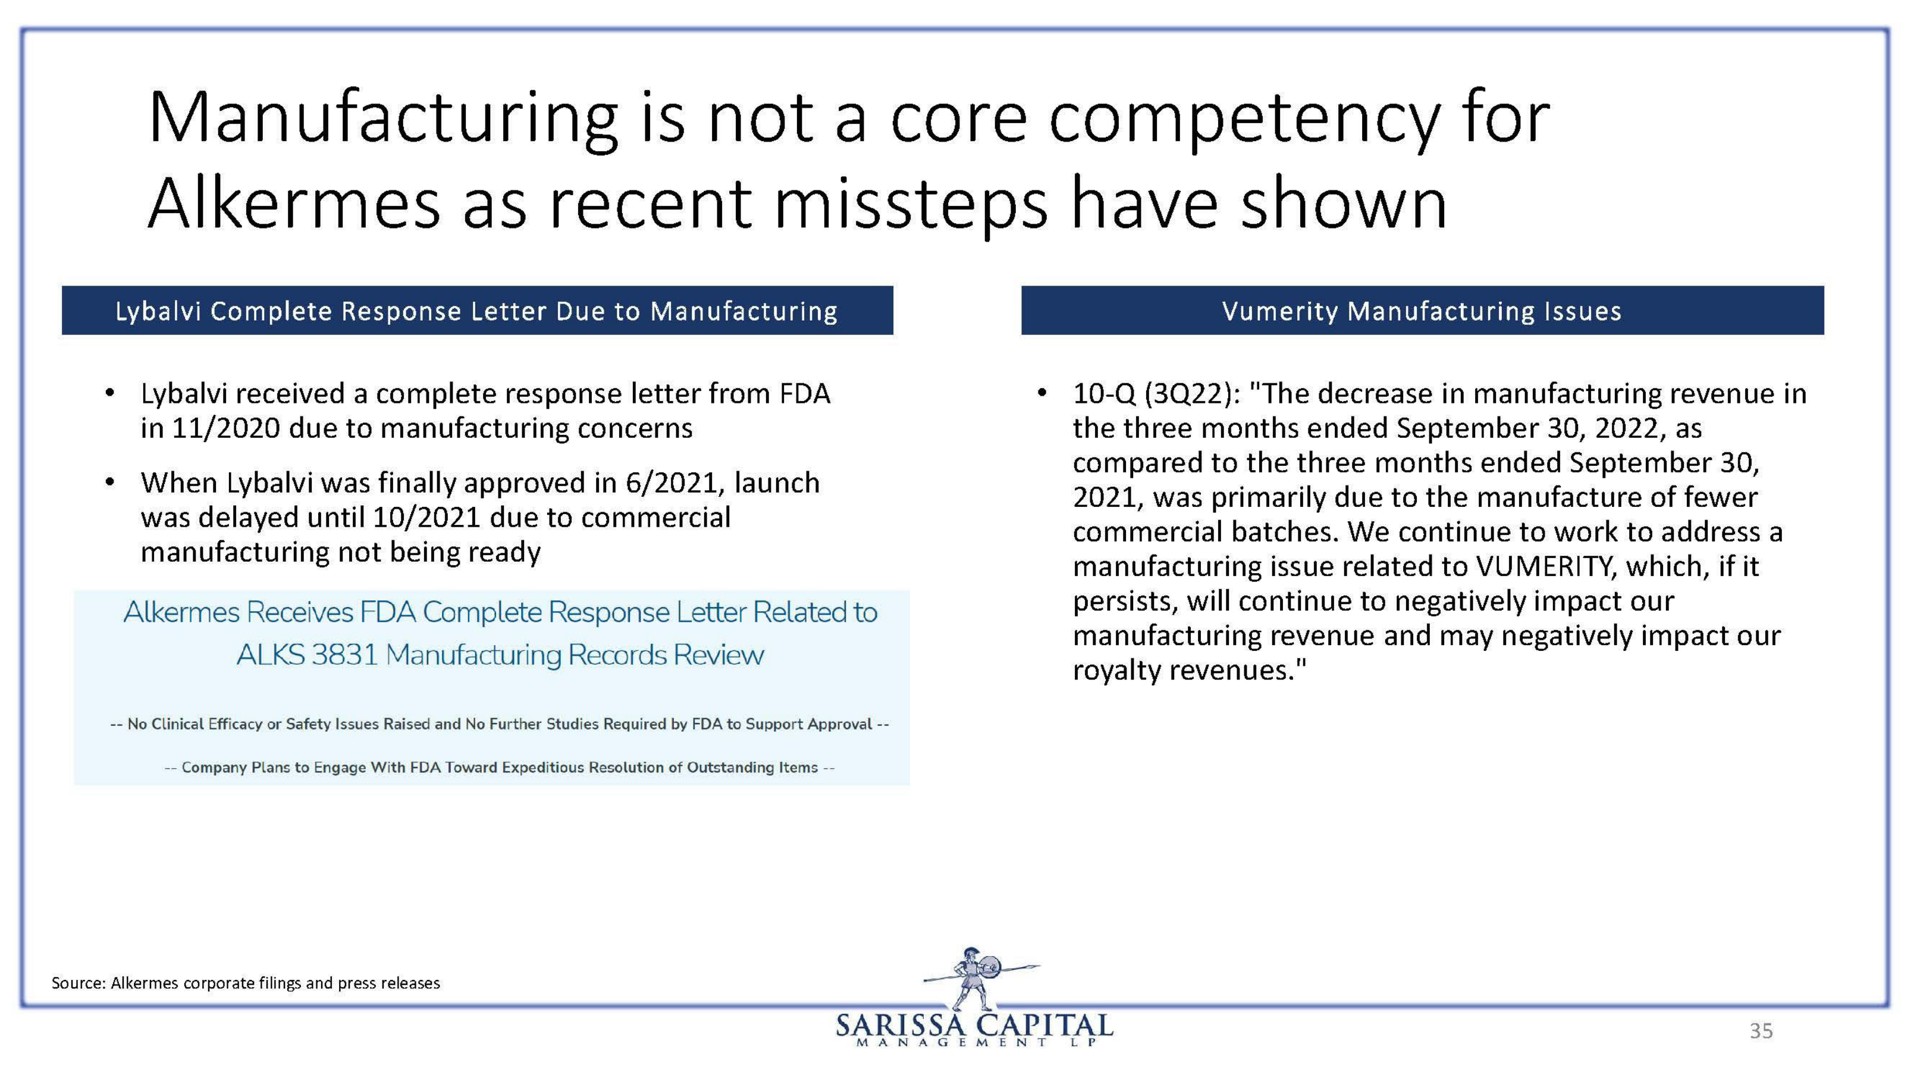 manufacturing is not a core competency for alkermes as recent missteps have shown | Sarissa Capital